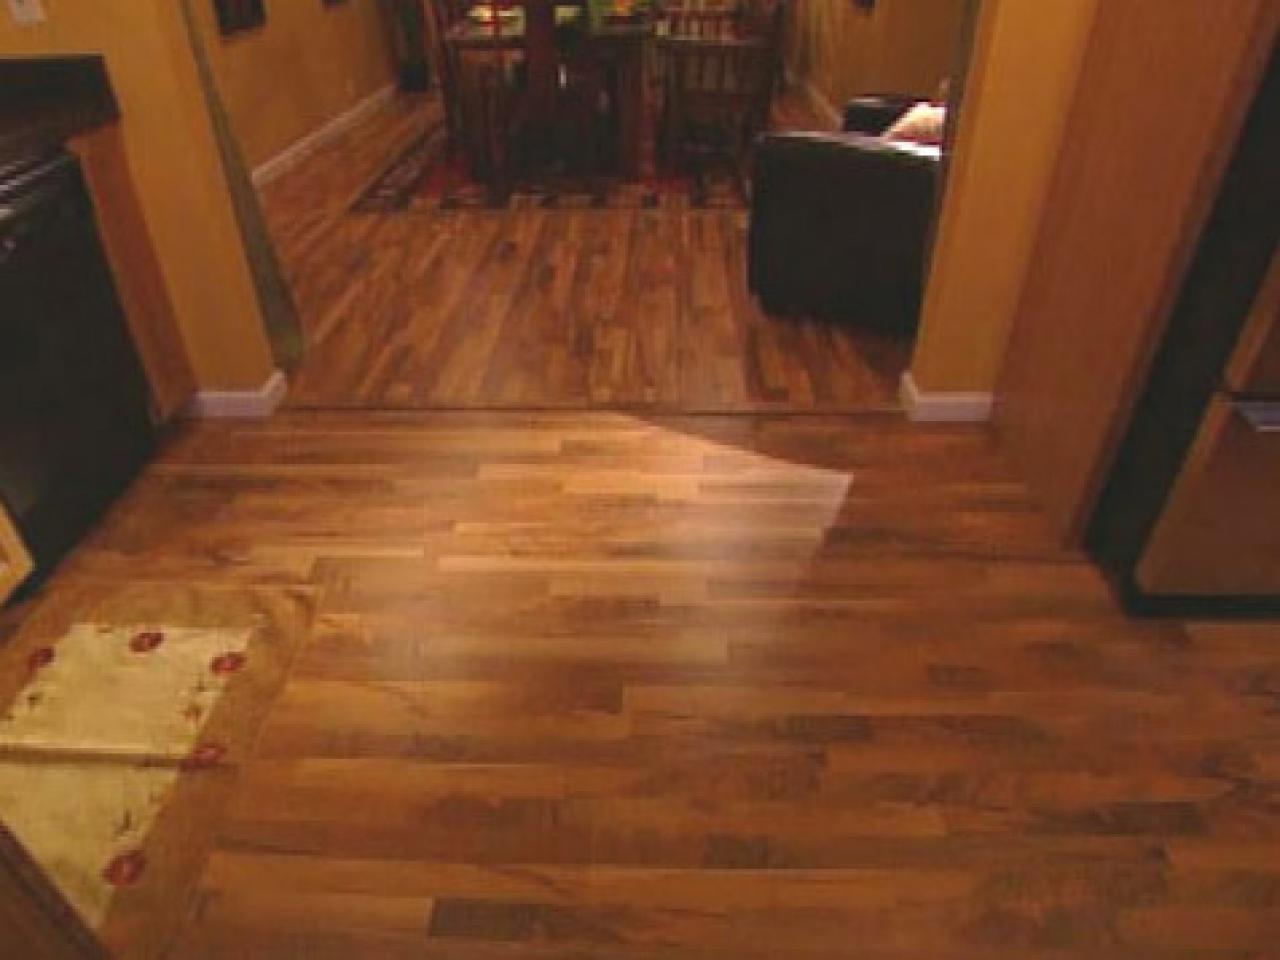 Install Tongue And Groove Wood Veneer, Which Direction To Lay Flooring In Kitchen